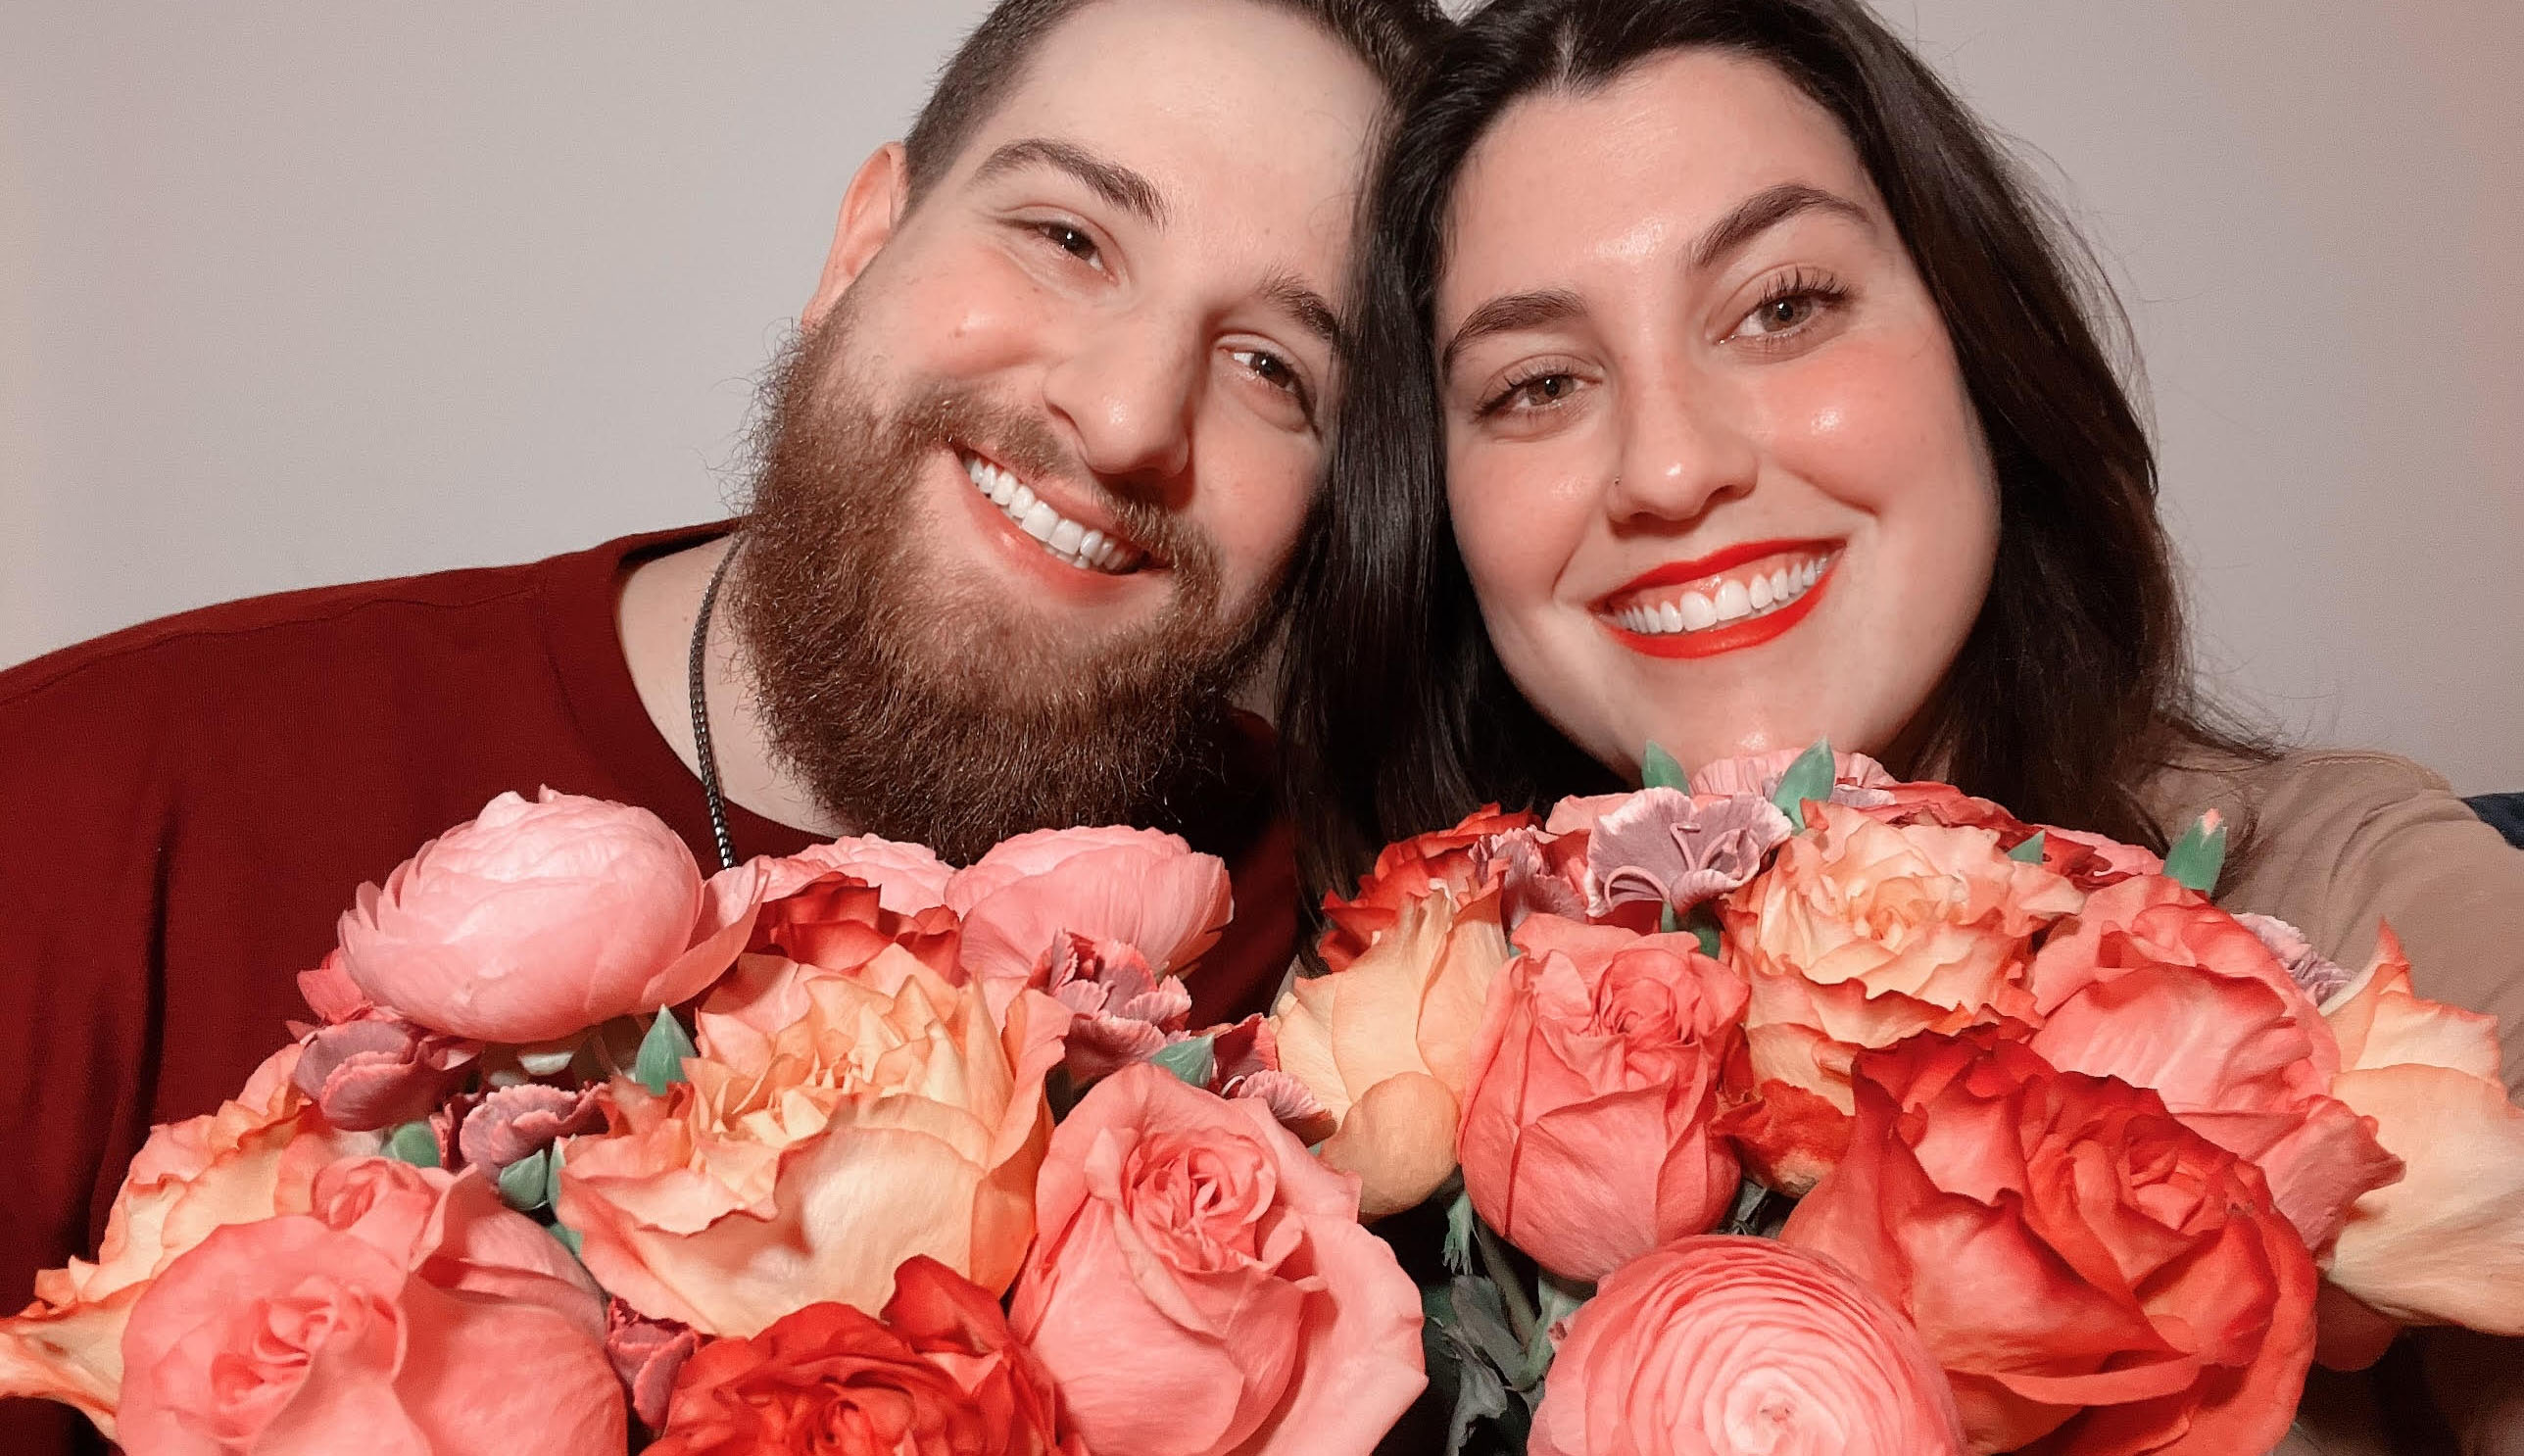 Couple holding pink and red romantic Valentine's Day Flowers